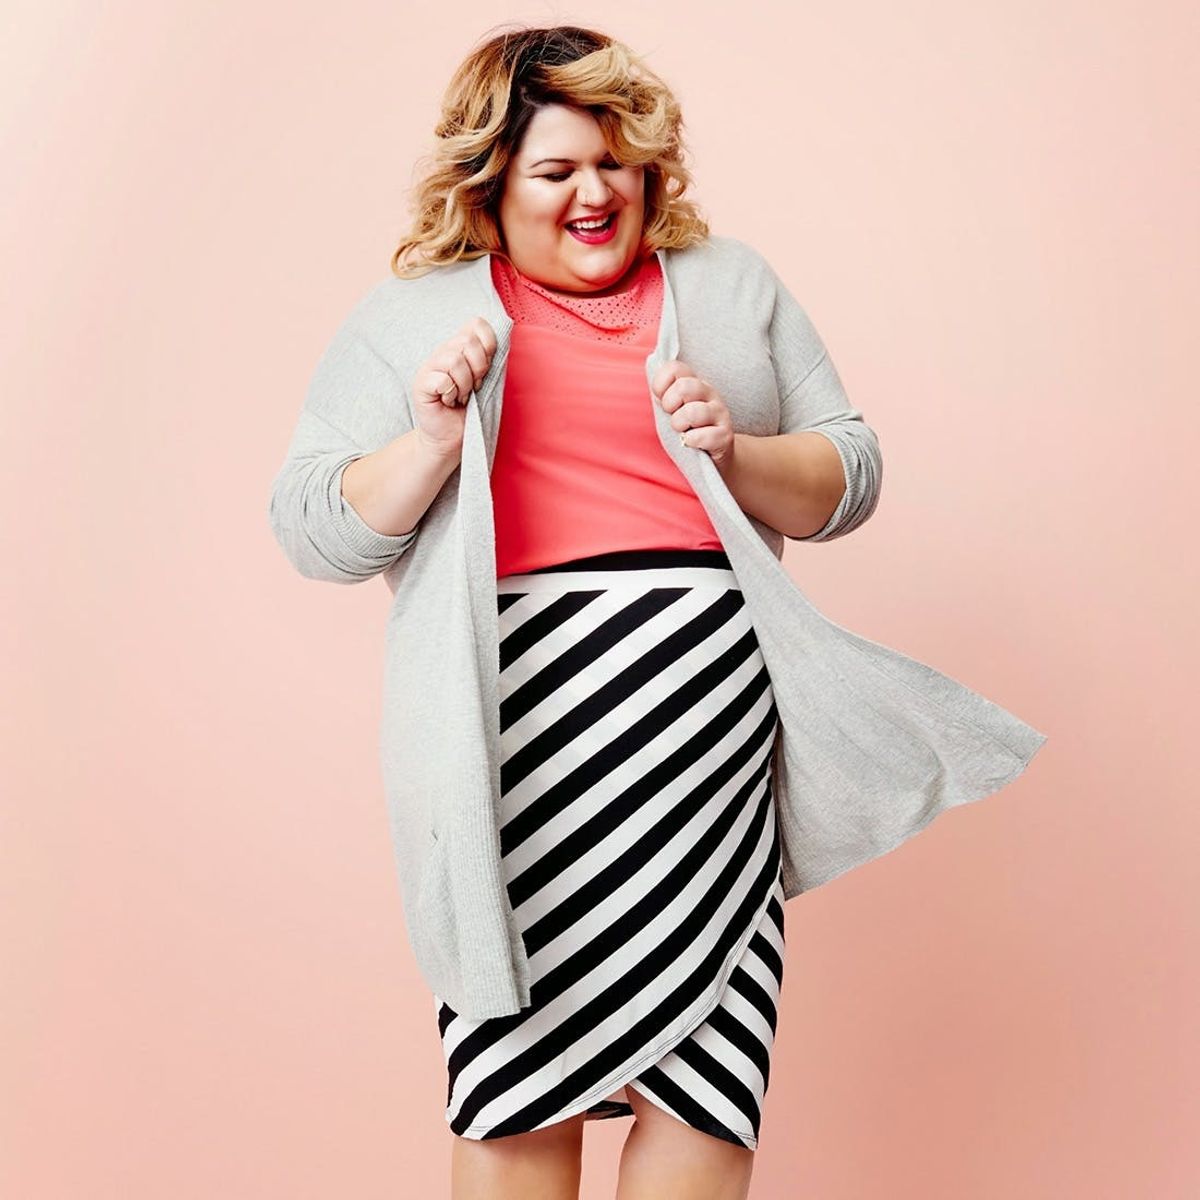 Target’s New Plus-Size Collection Will Make You Super Excited for Fall